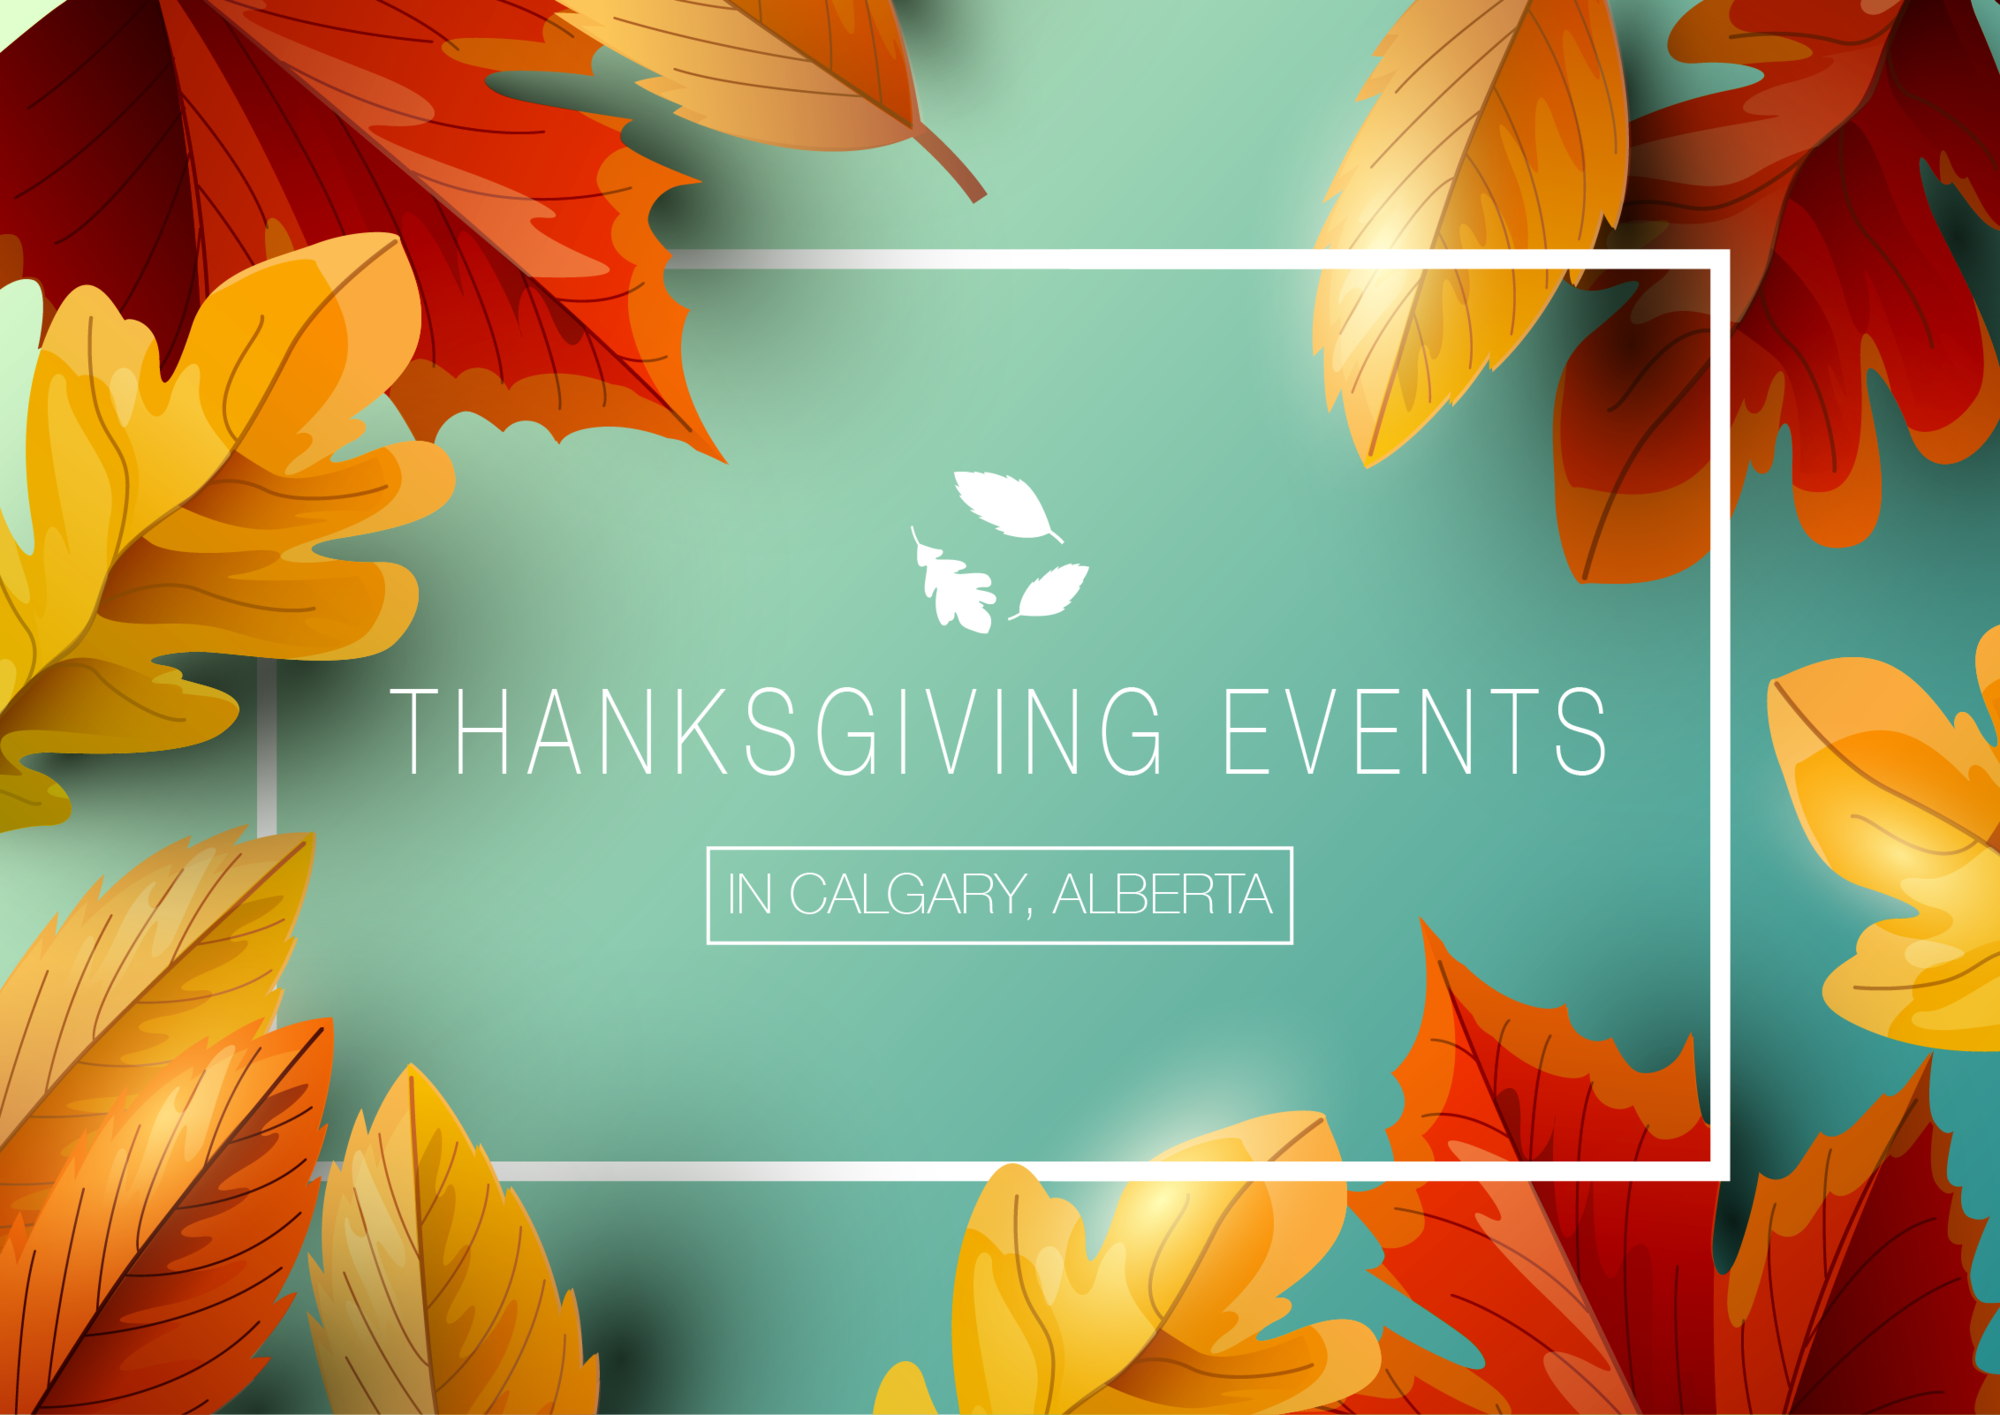 Thanksgiving Holiday Celebrations in Calgary